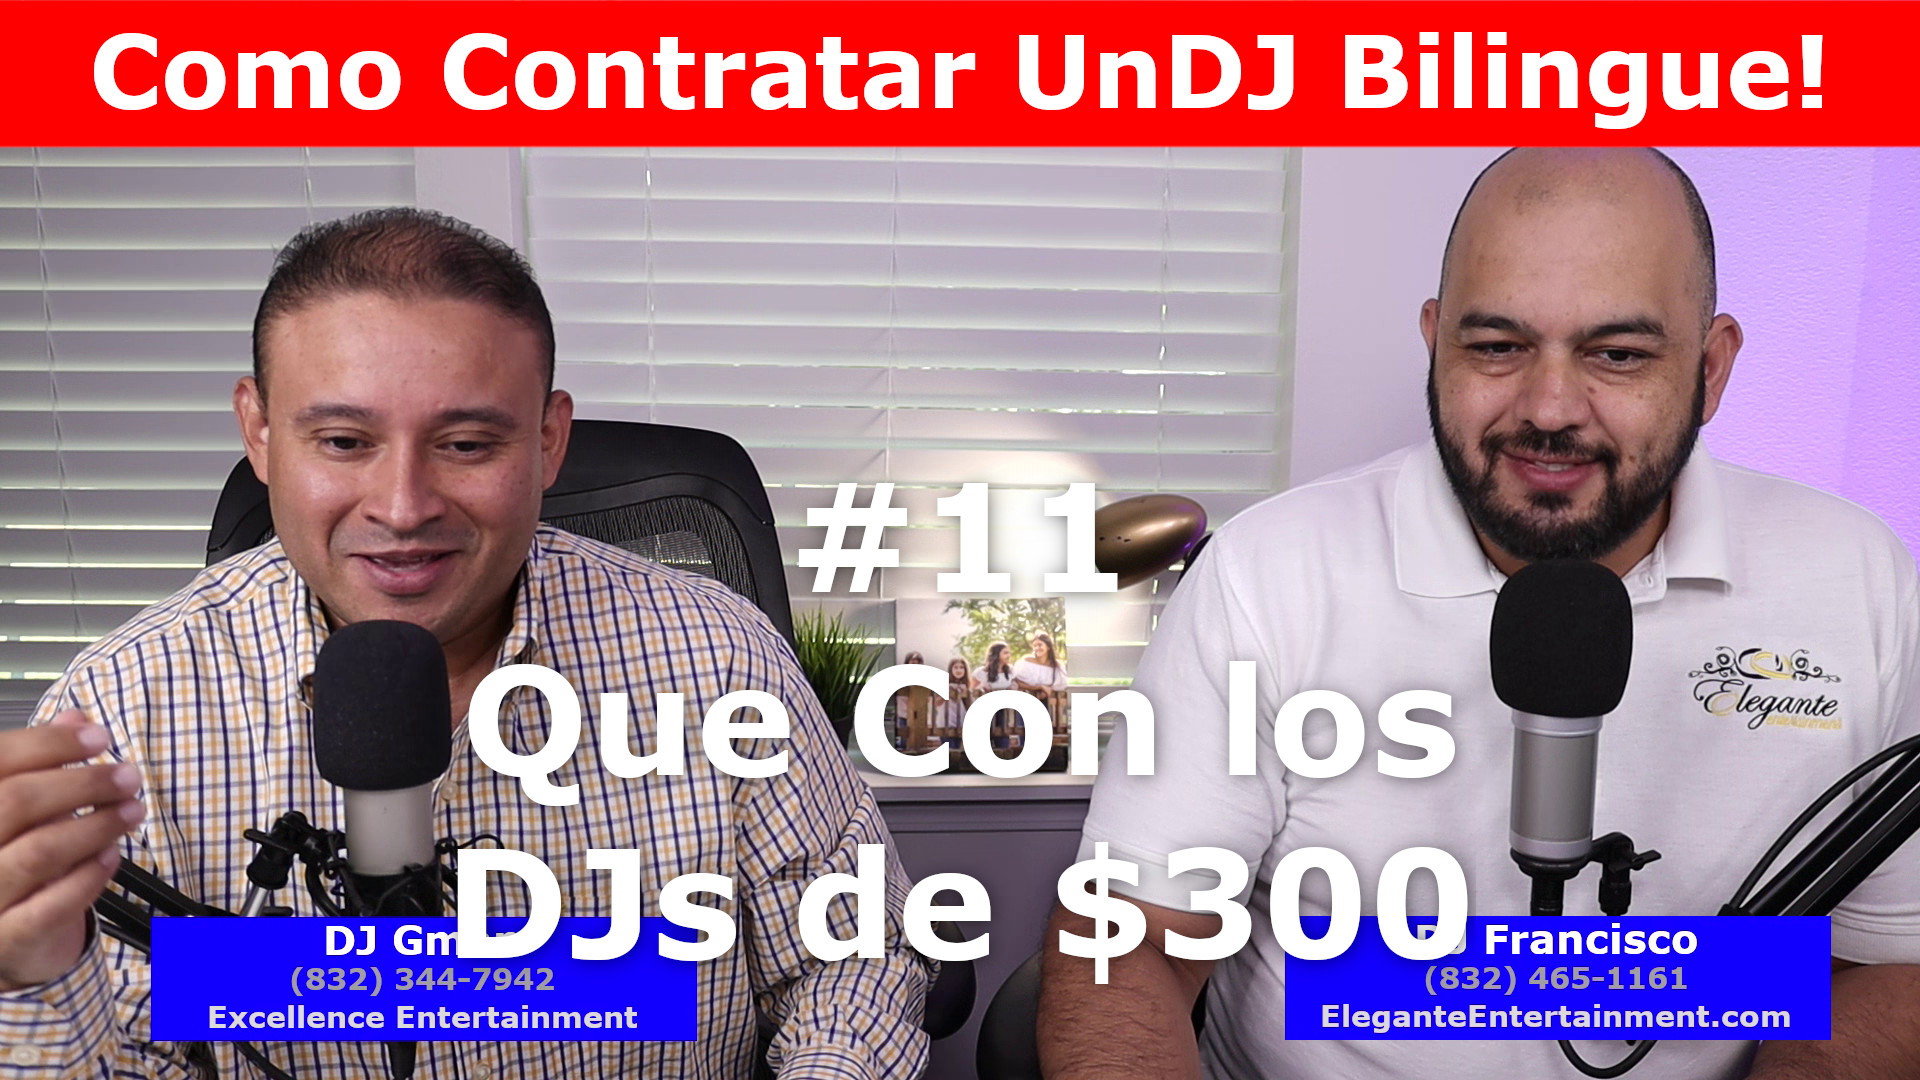 DJ in Houston | #11 DJs that Charge $300